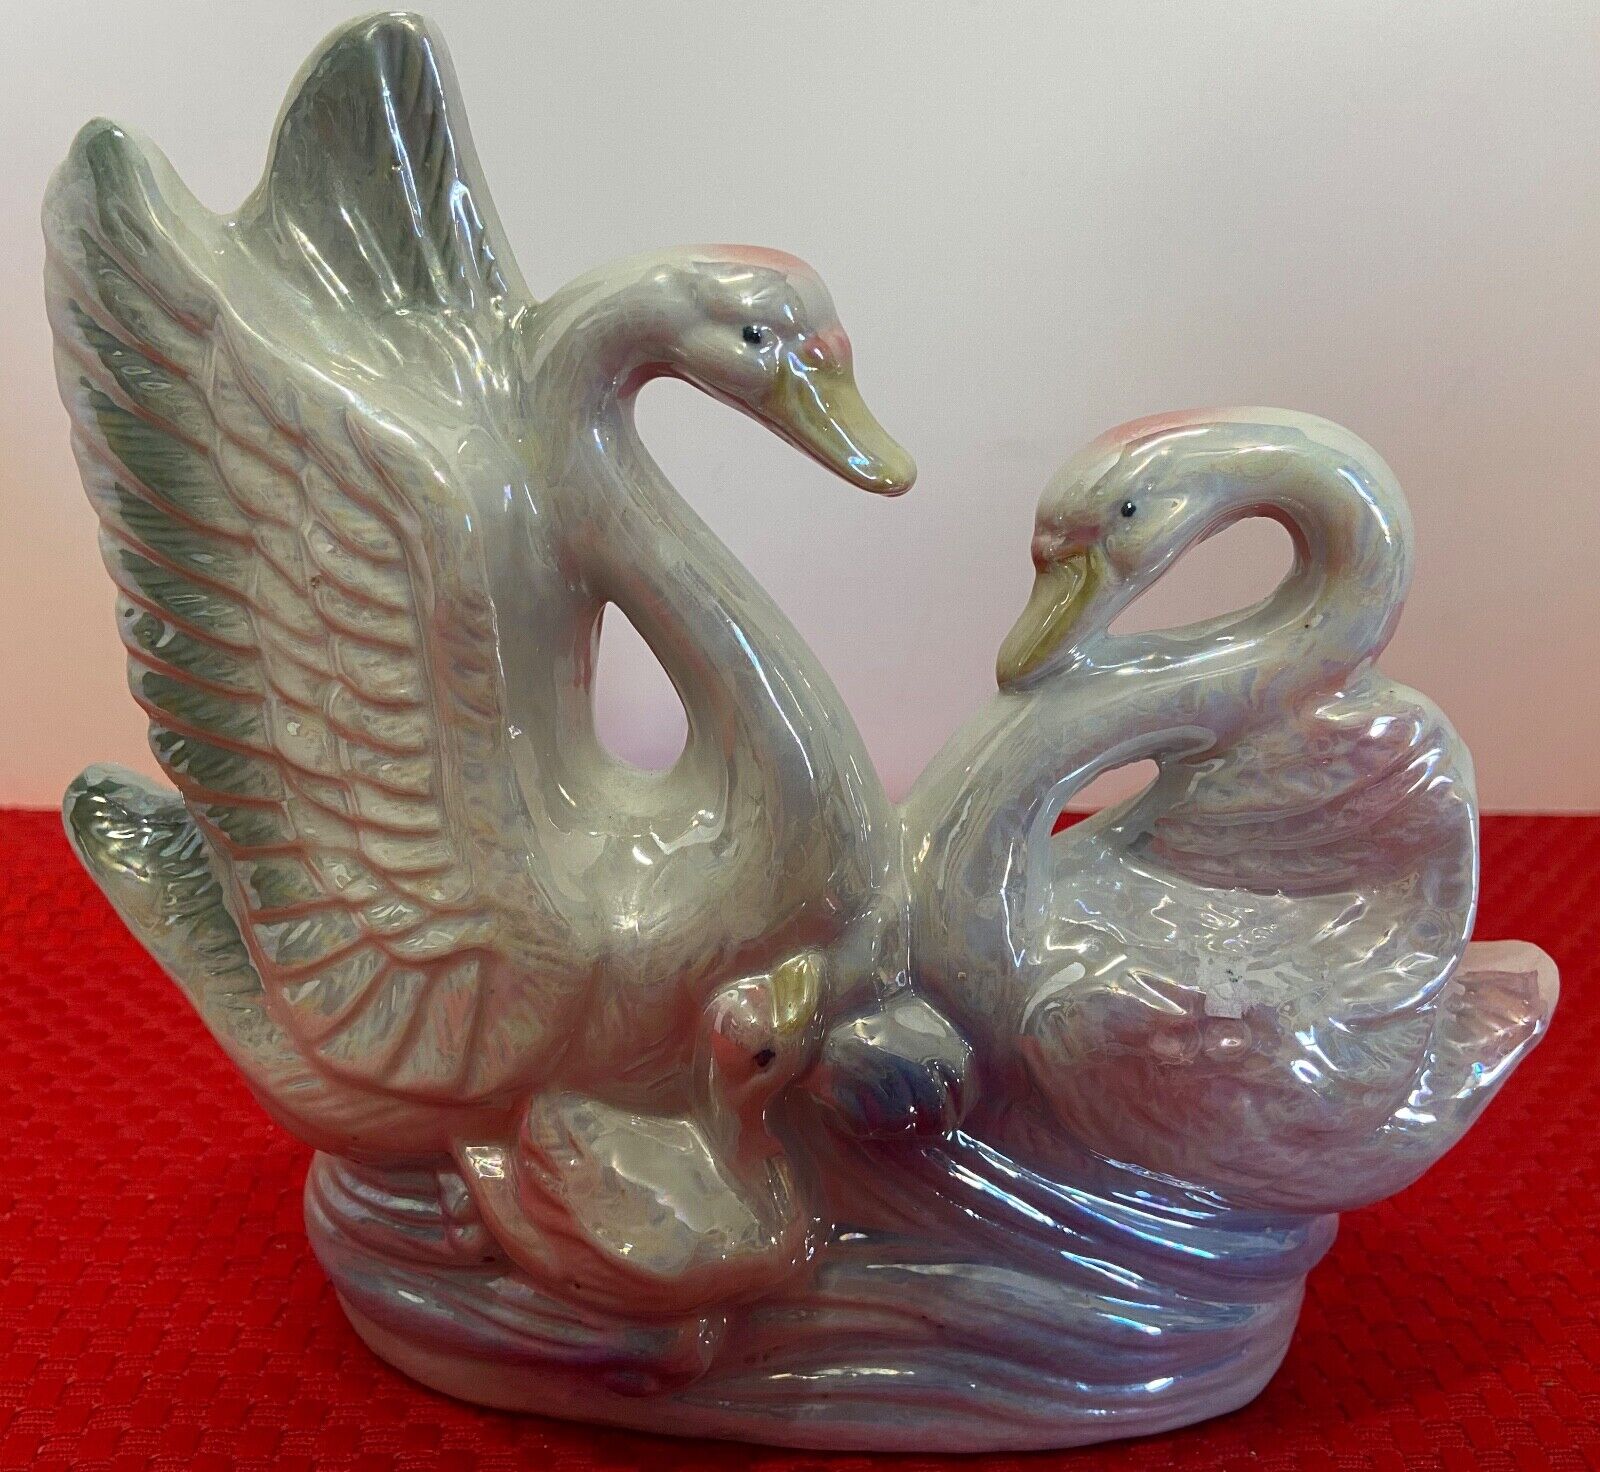 Excellent Vintage Zhongguo Zhi Zao, Porcelain 3 Swans Figurine. Red China Stamp